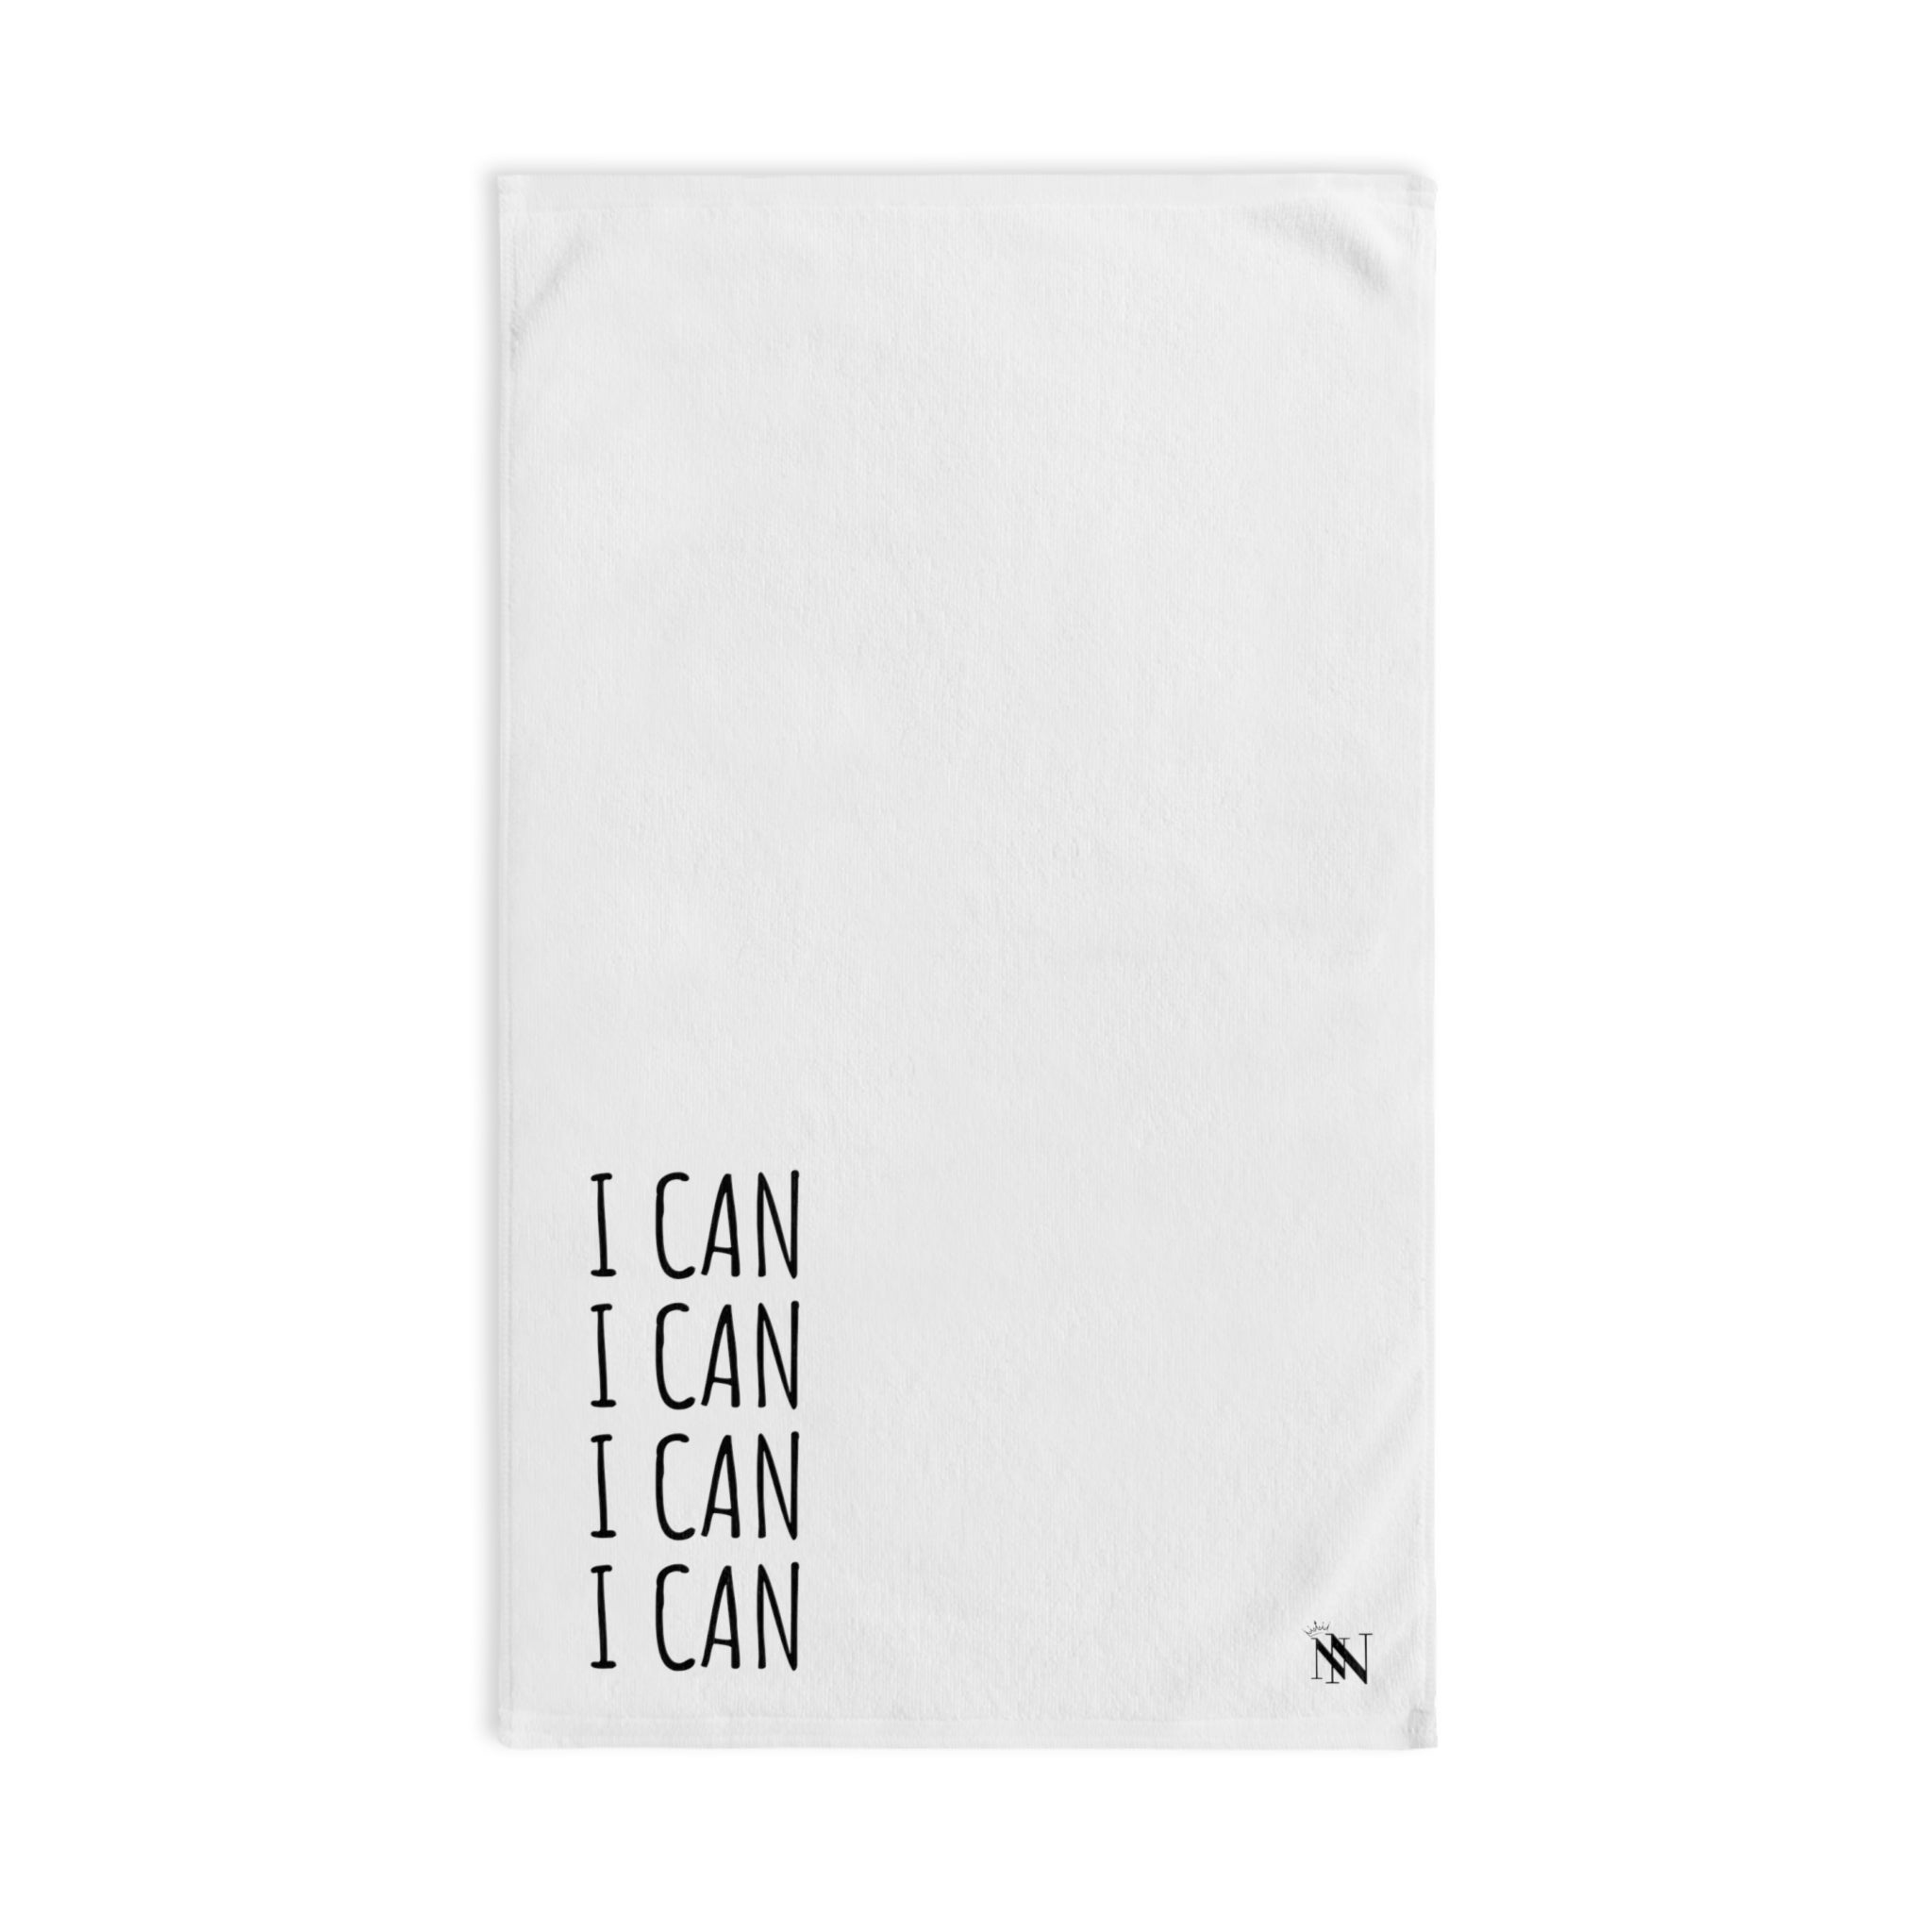 I Can I Can White | Funny Gifts for Men - Gifts for Him - Birthday Gifts for Men, Him, Her, Husband, Boyfriend, Girlfriend, New Couple Gifts, Fathers & Valentines Day Gifts, Christmas Gifts NECTAR NAPKINS